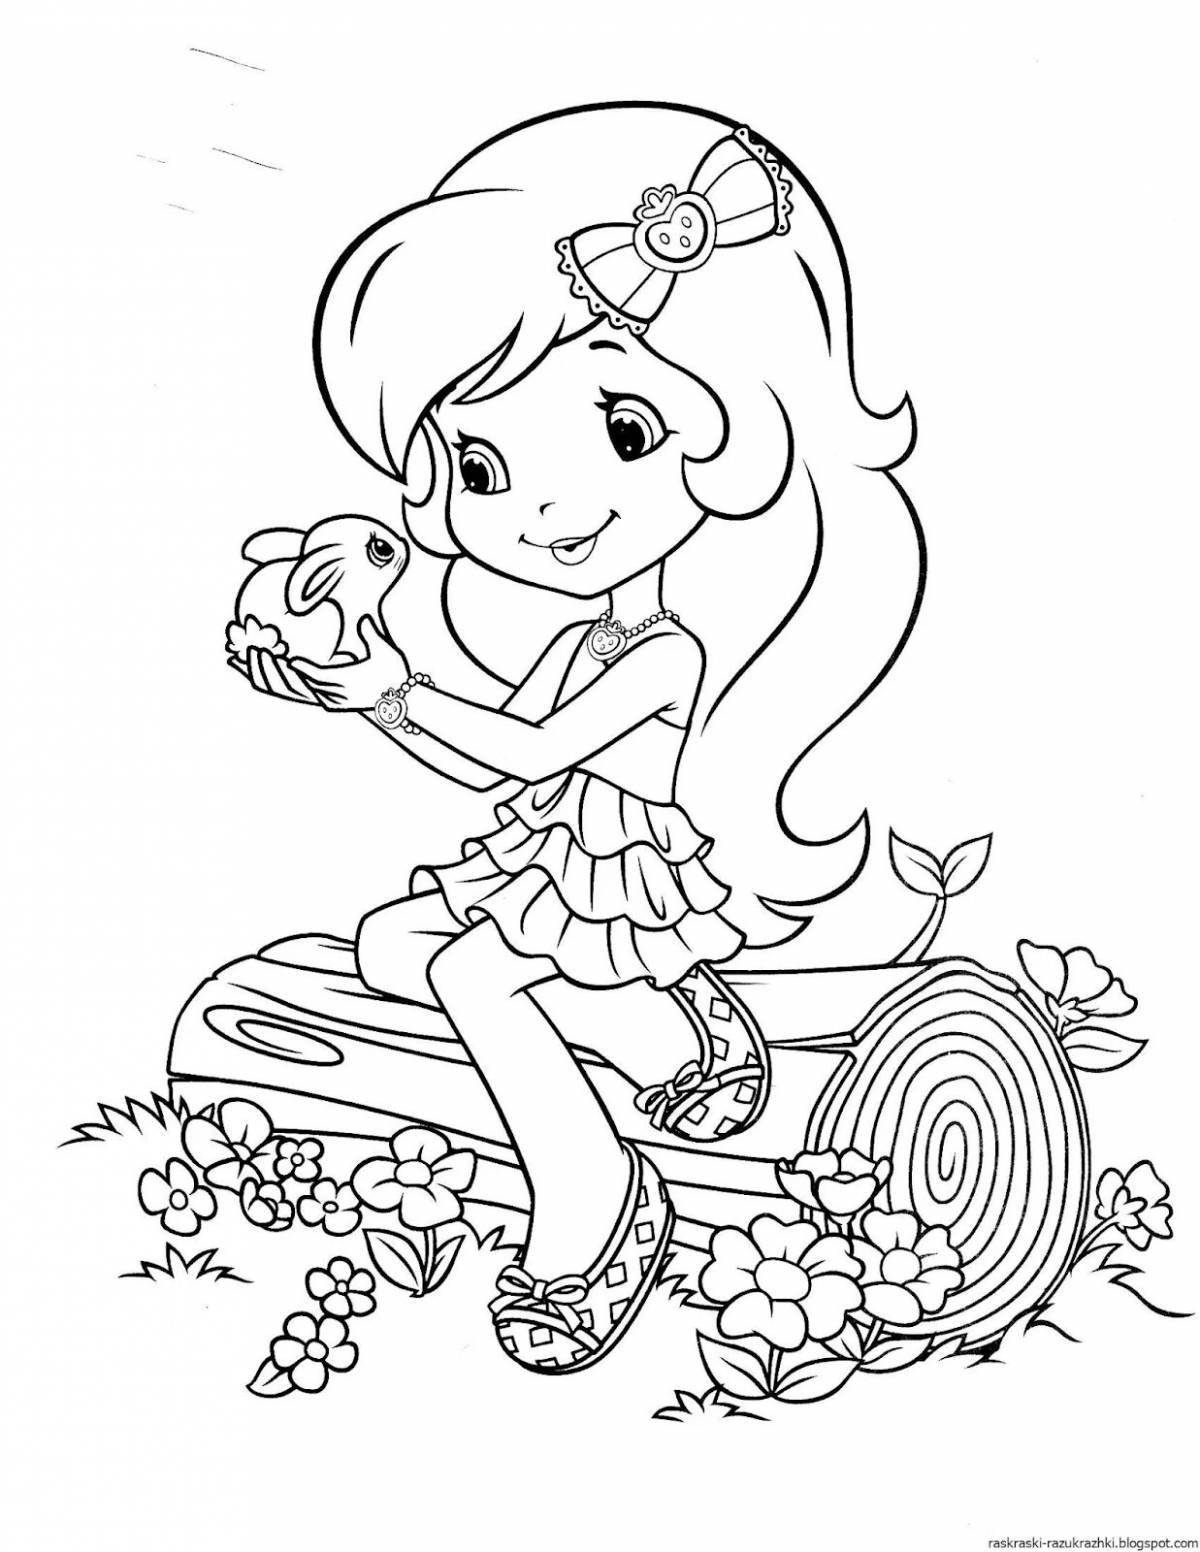 Cute cartoon girls coloring pages